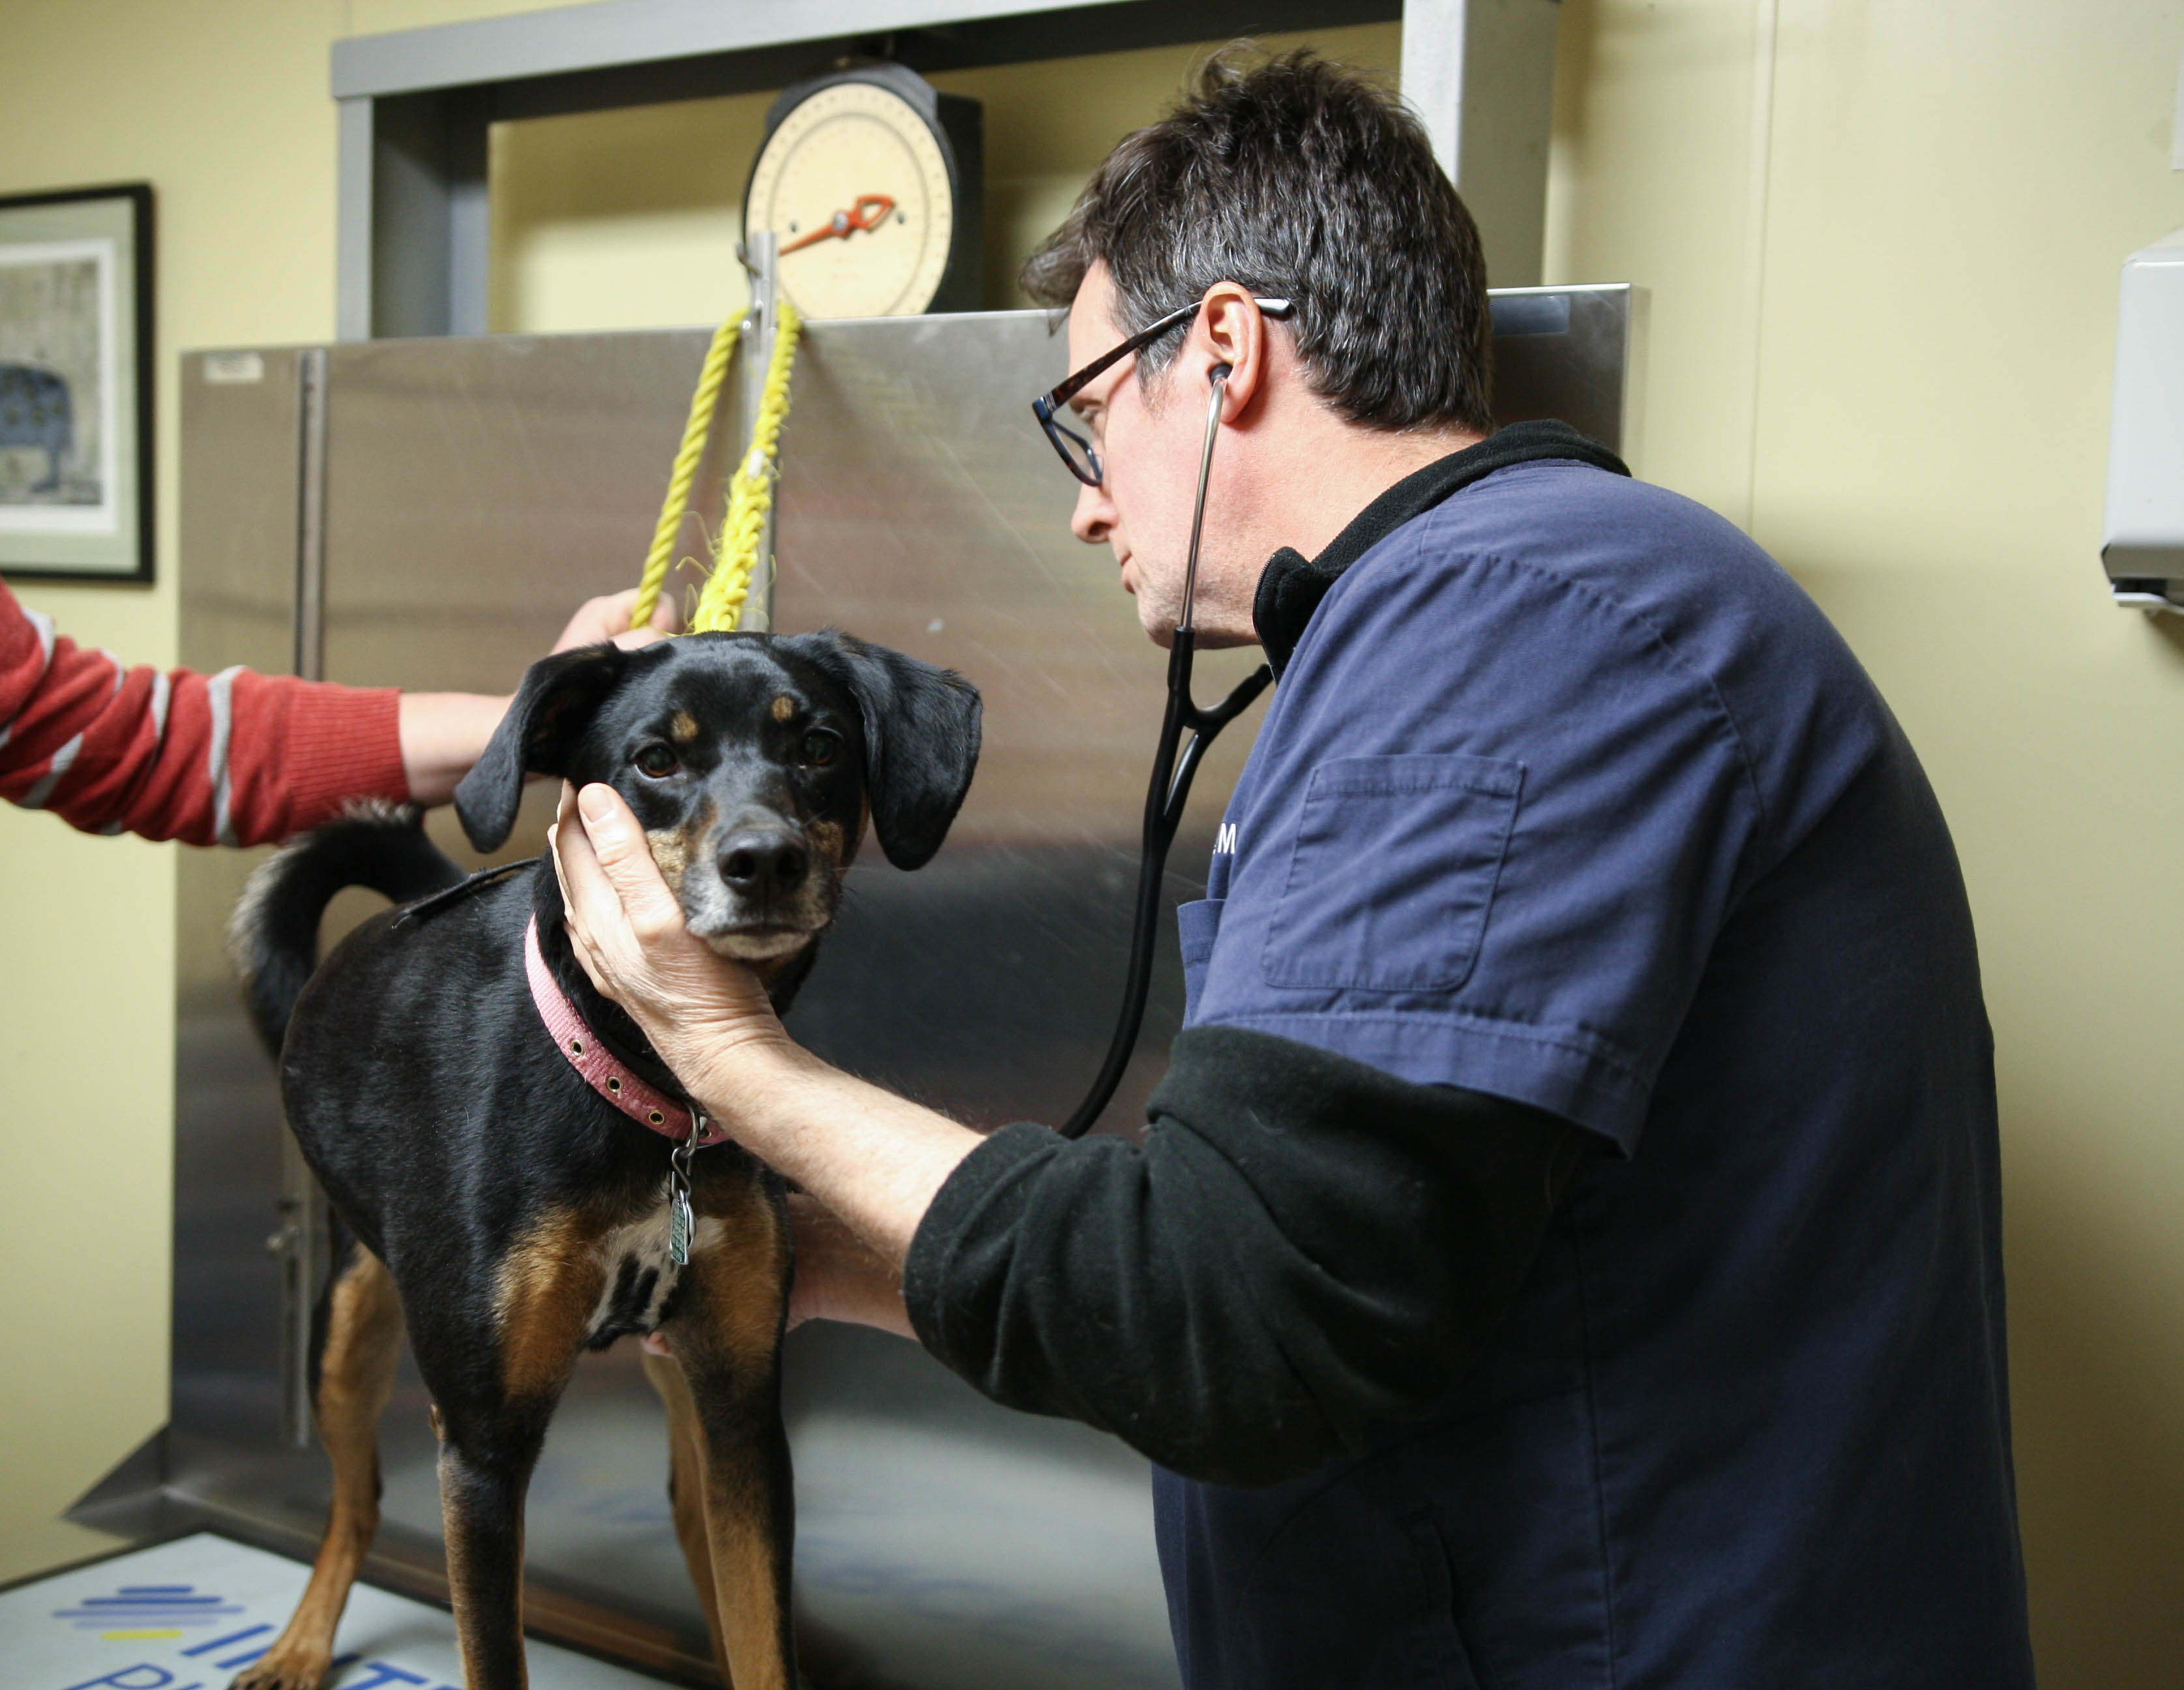 Dr. Palmer uses a stethoscope to listen to a dog's heart and lungs during a wellness exam.